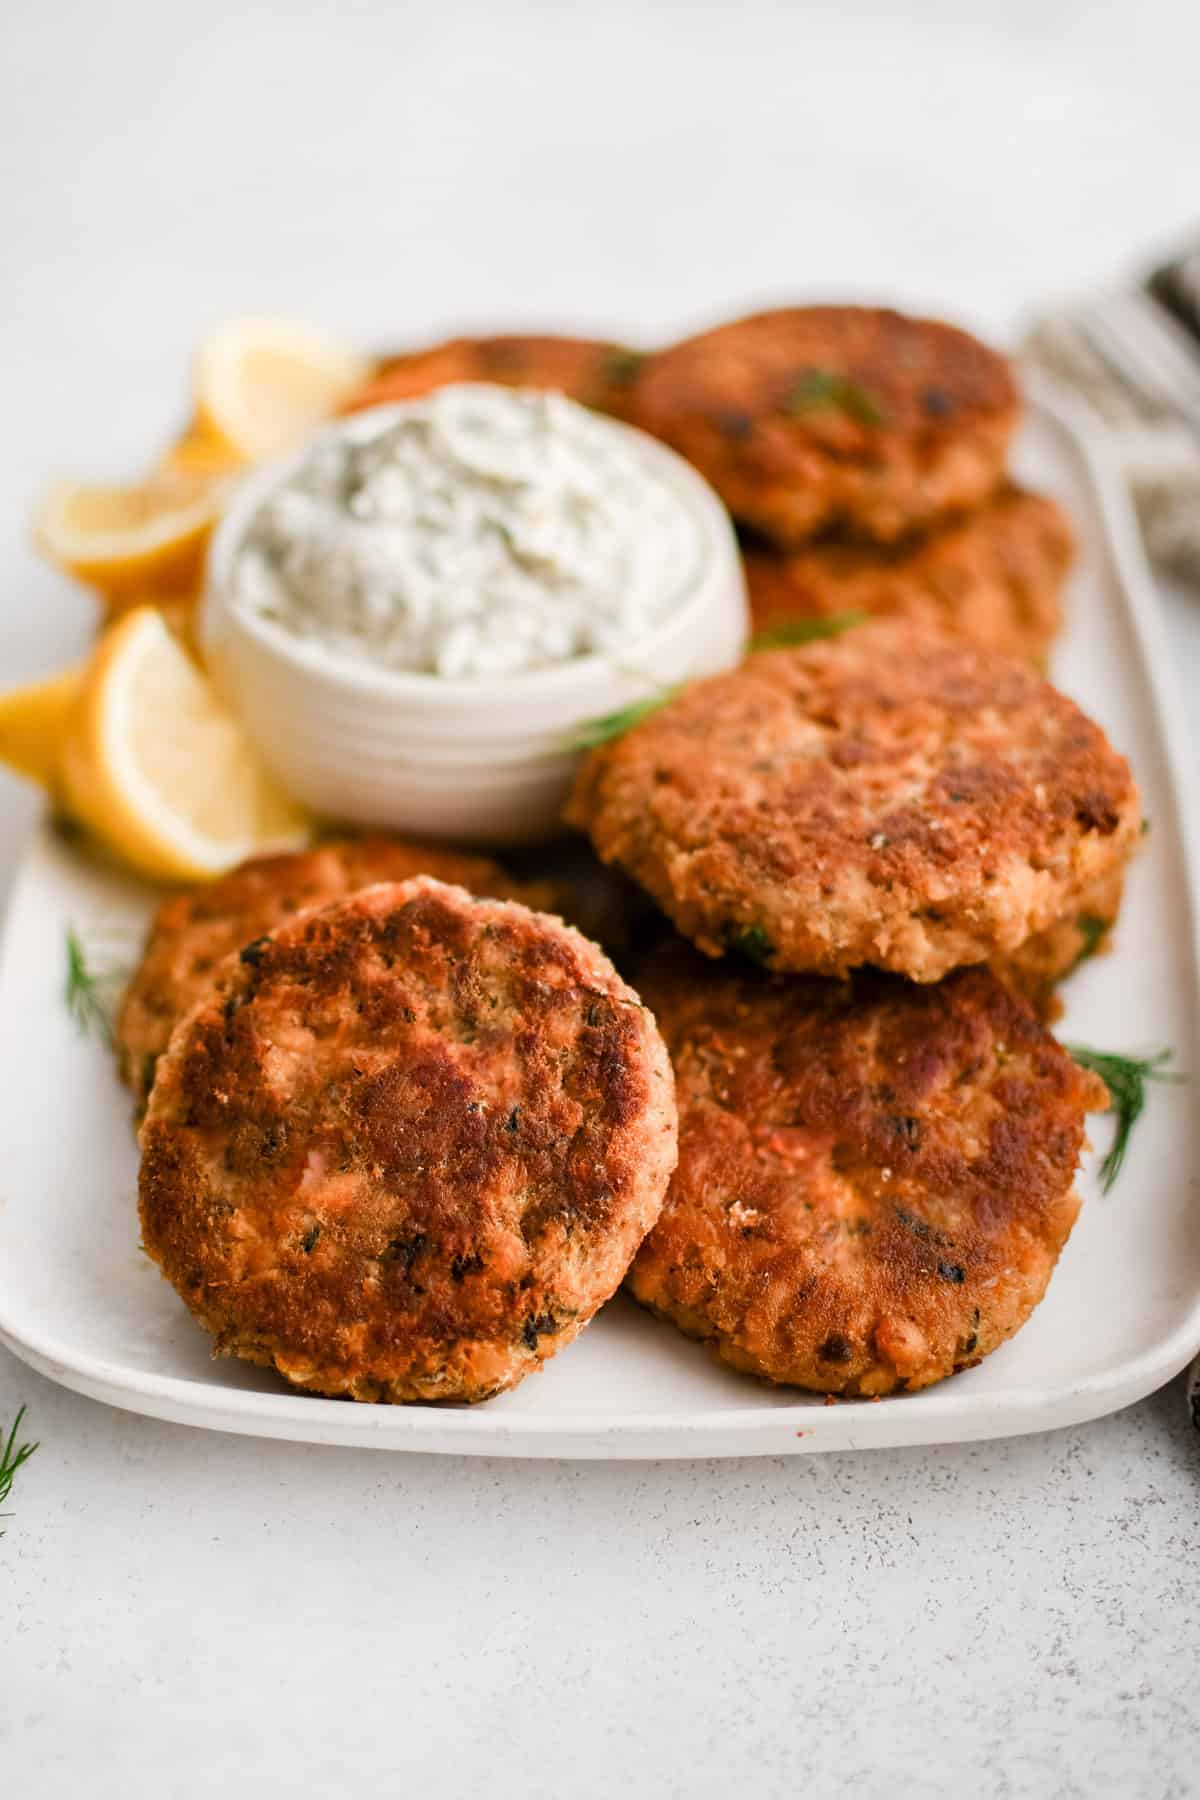 image of prepared salmon patties on a plate with lemon garnish and dill dip